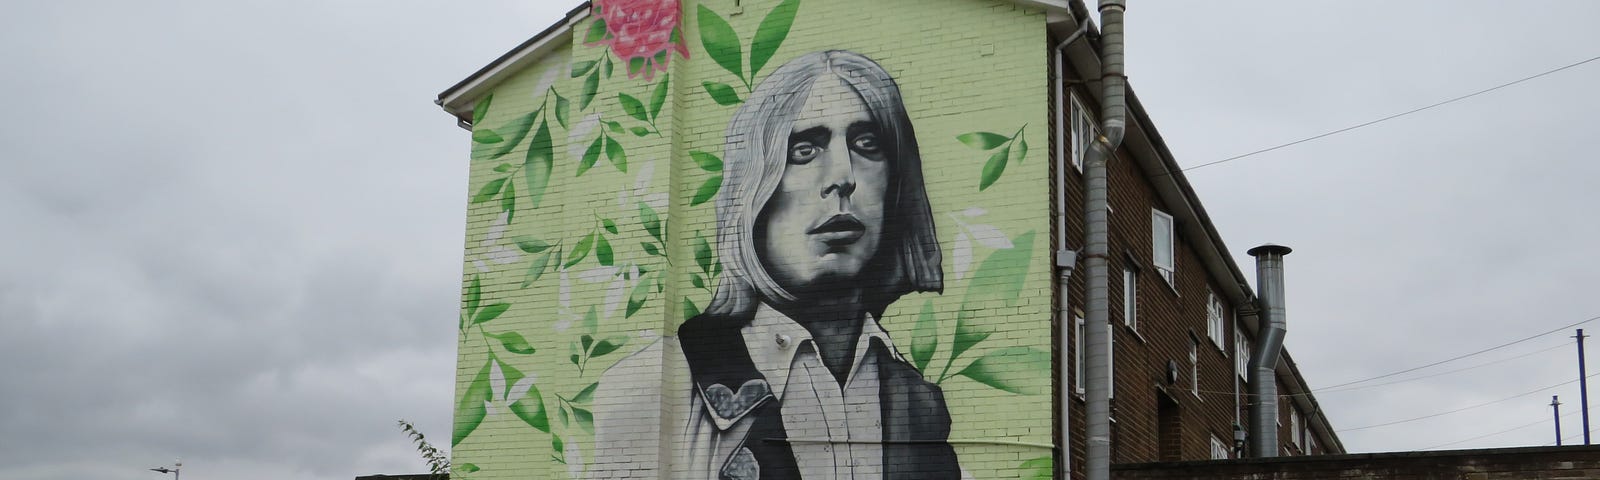 Large mural on a wall of the side of a building on an housing estate depicting a portrait of guitarist Mick Ronson, head and upper body, surrounded by flowers and greenery, also showing children on a park’s running track.